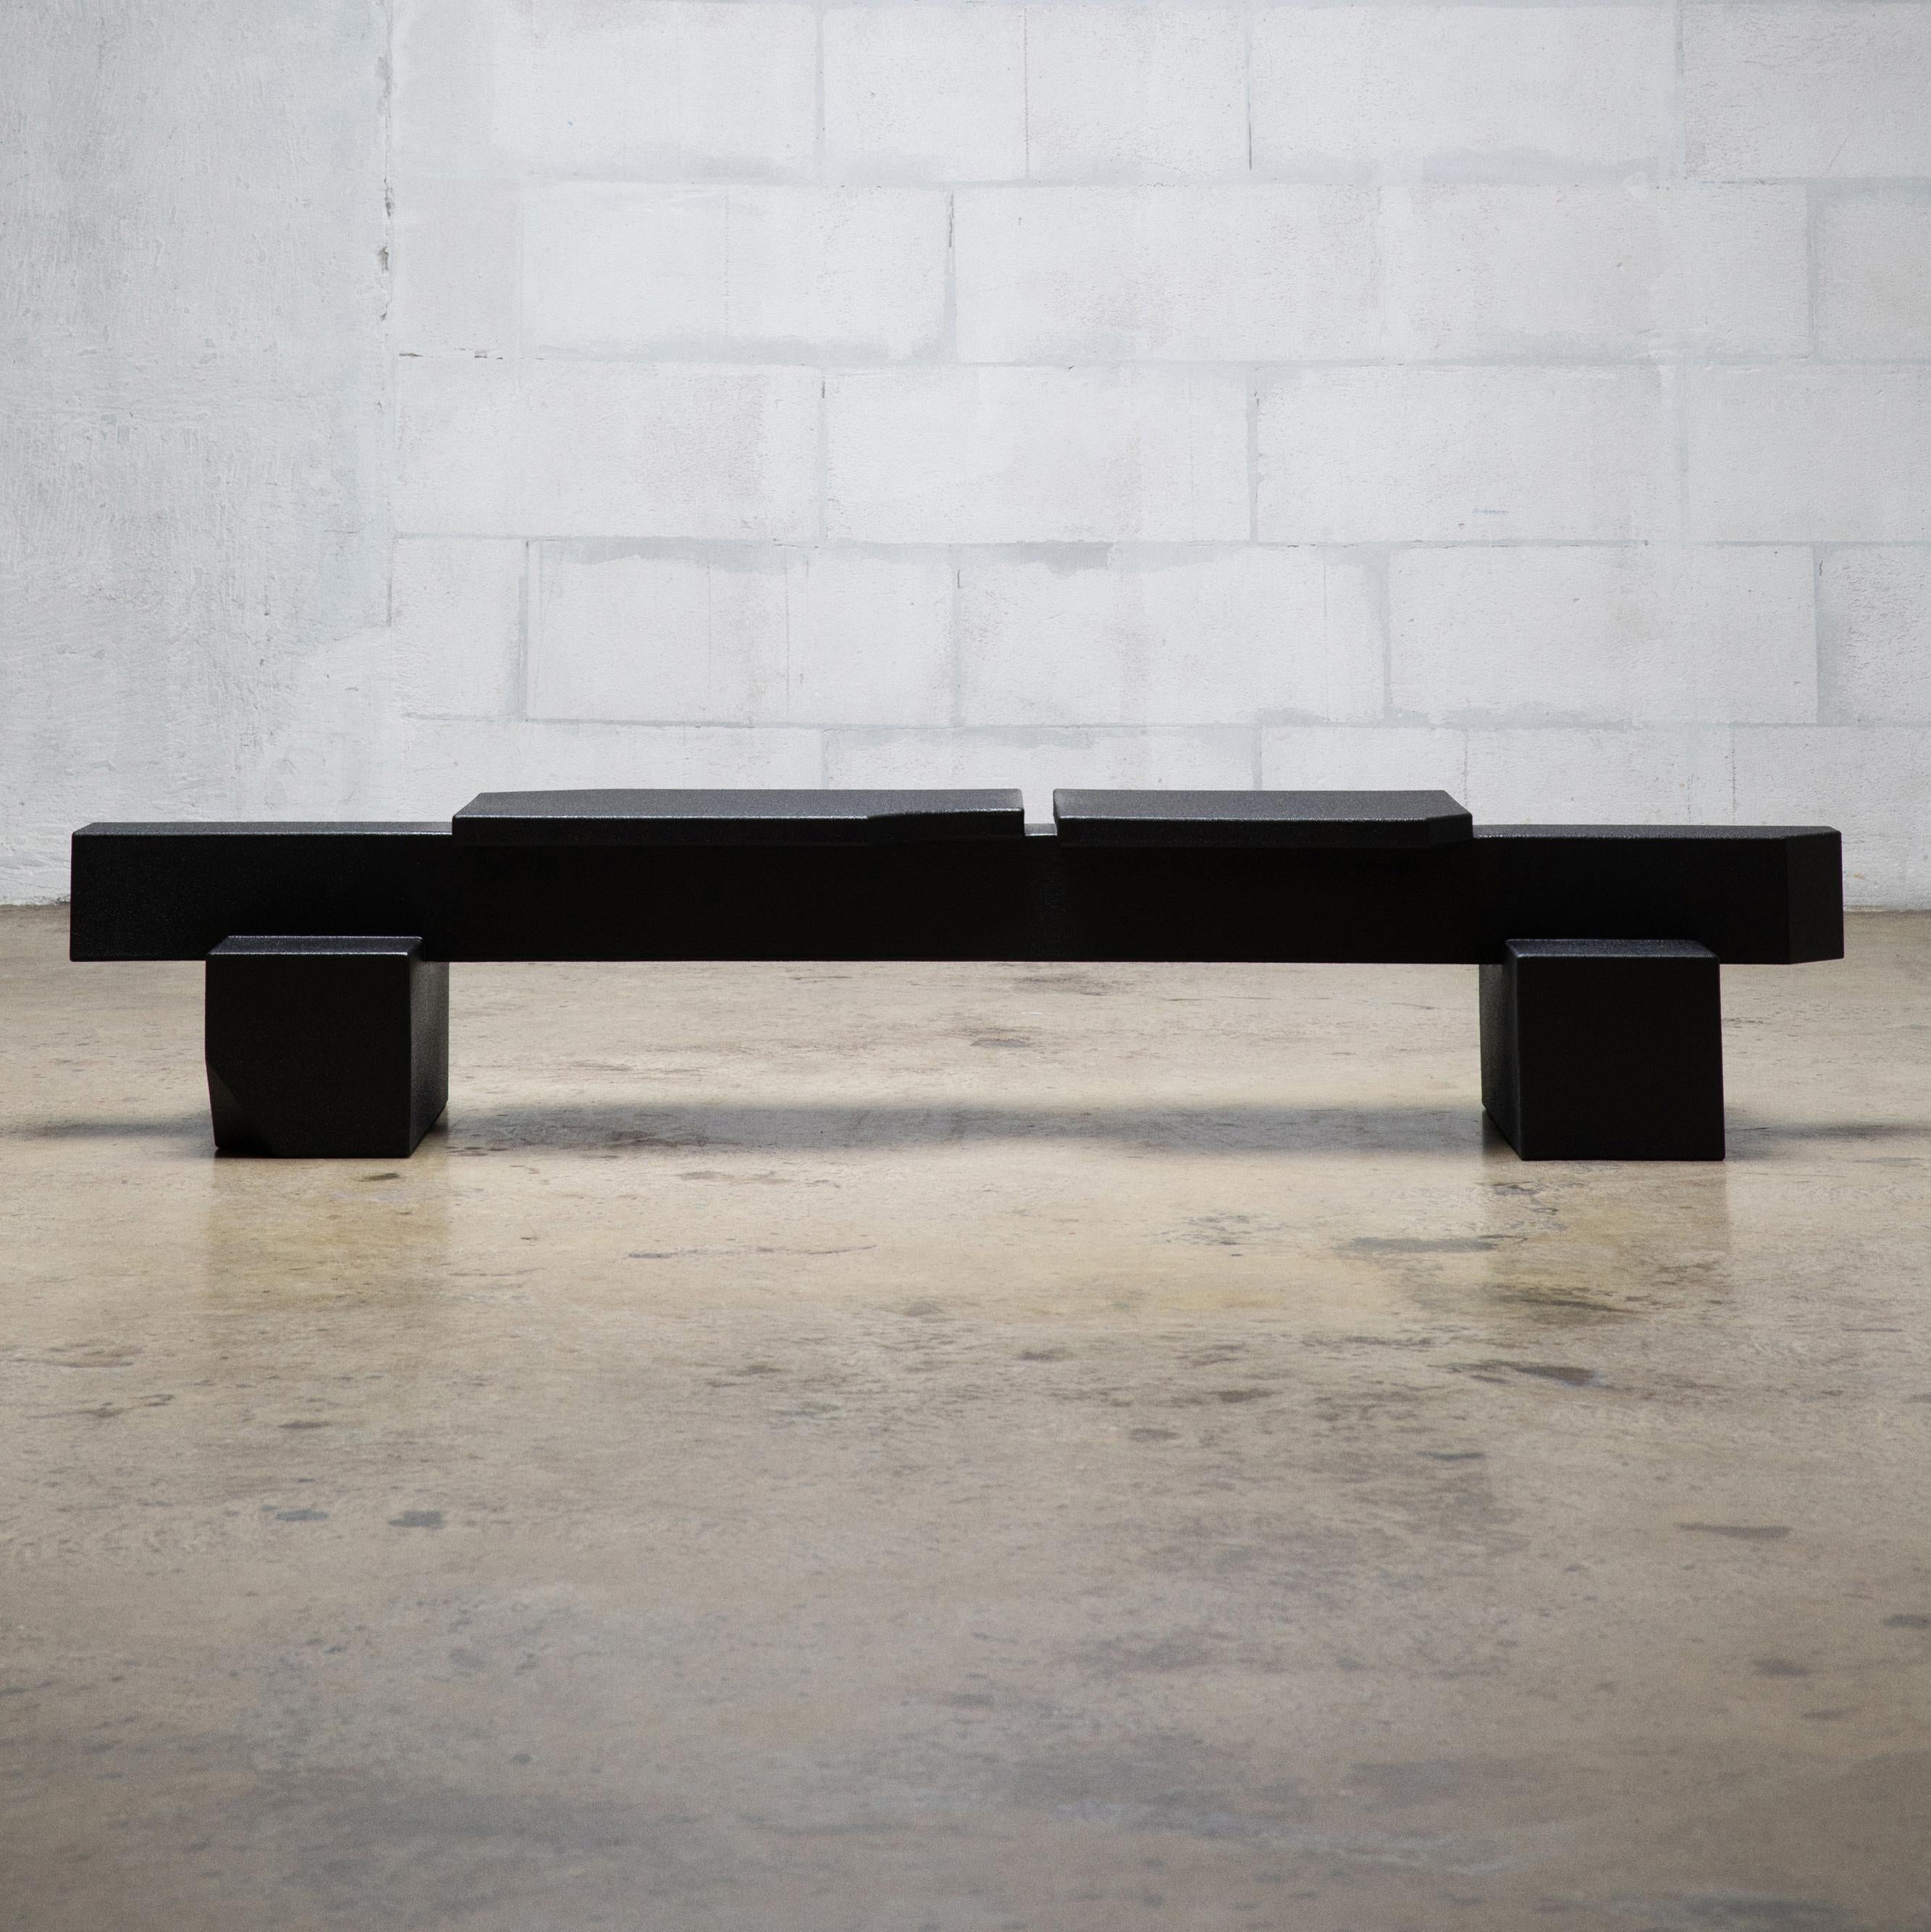 SSB01B bench is the first object created by sashaxsasha as a piece of collectible design. 
The source of inspiration for the form of the objects is the furniture that construction workers in Russia make for everyday use by means turned out to be at